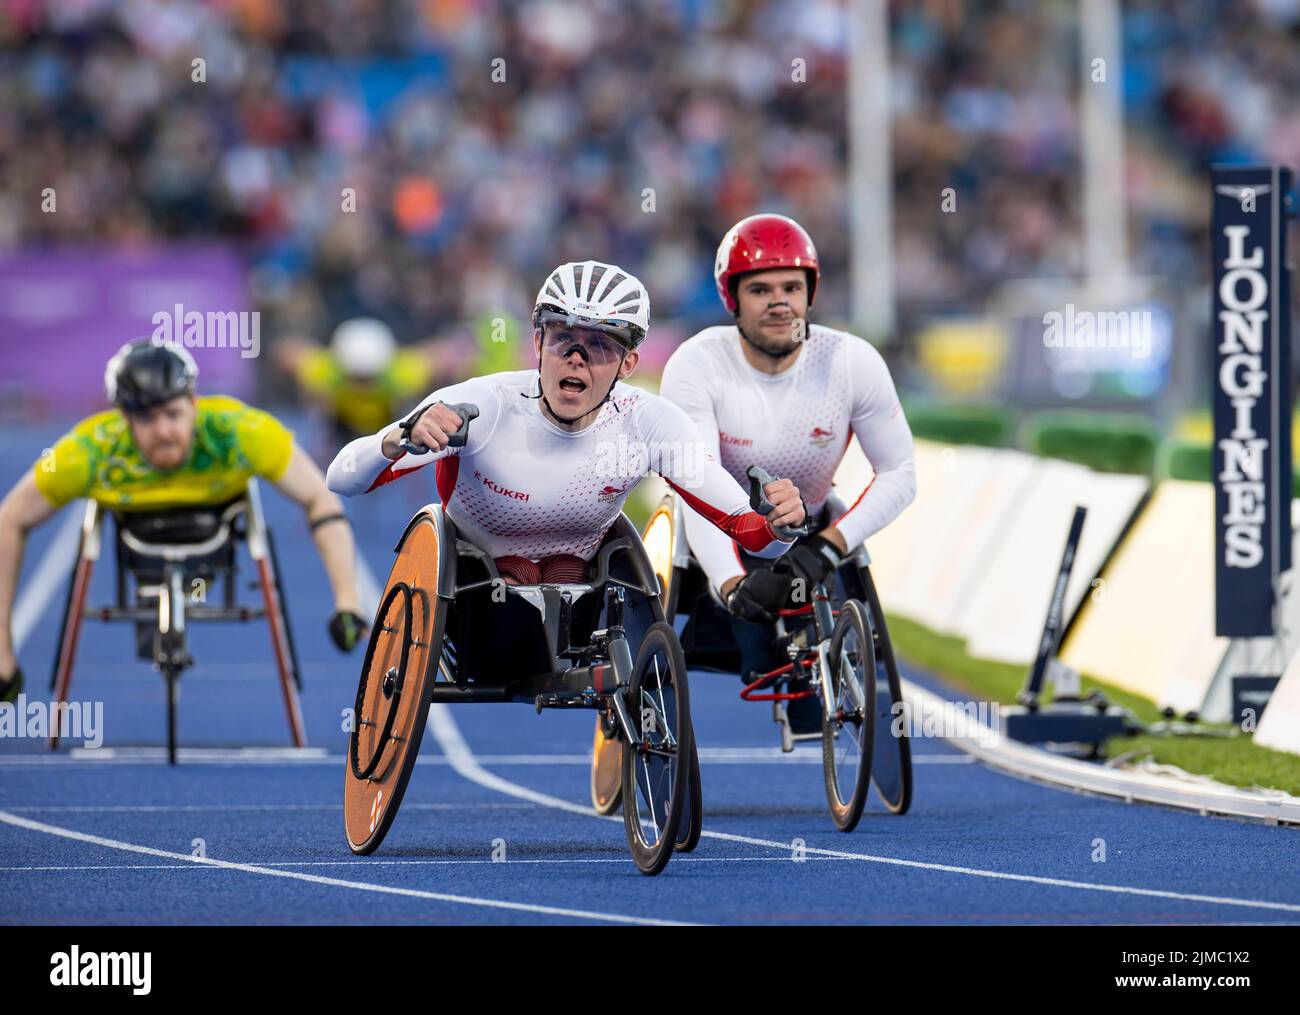 Birmingham, UK. 5th Aug 2022. 5th August 2022; Alexander Stadium, Birmingham, Midlands, England: Day 8 of the 2022 Commonwealth Games: Nathan Maguire winning the Gold Medal in the Men's T53/54 1500m Final Credit: Action Plus Sports Images/Alamy Live News Stock Photo